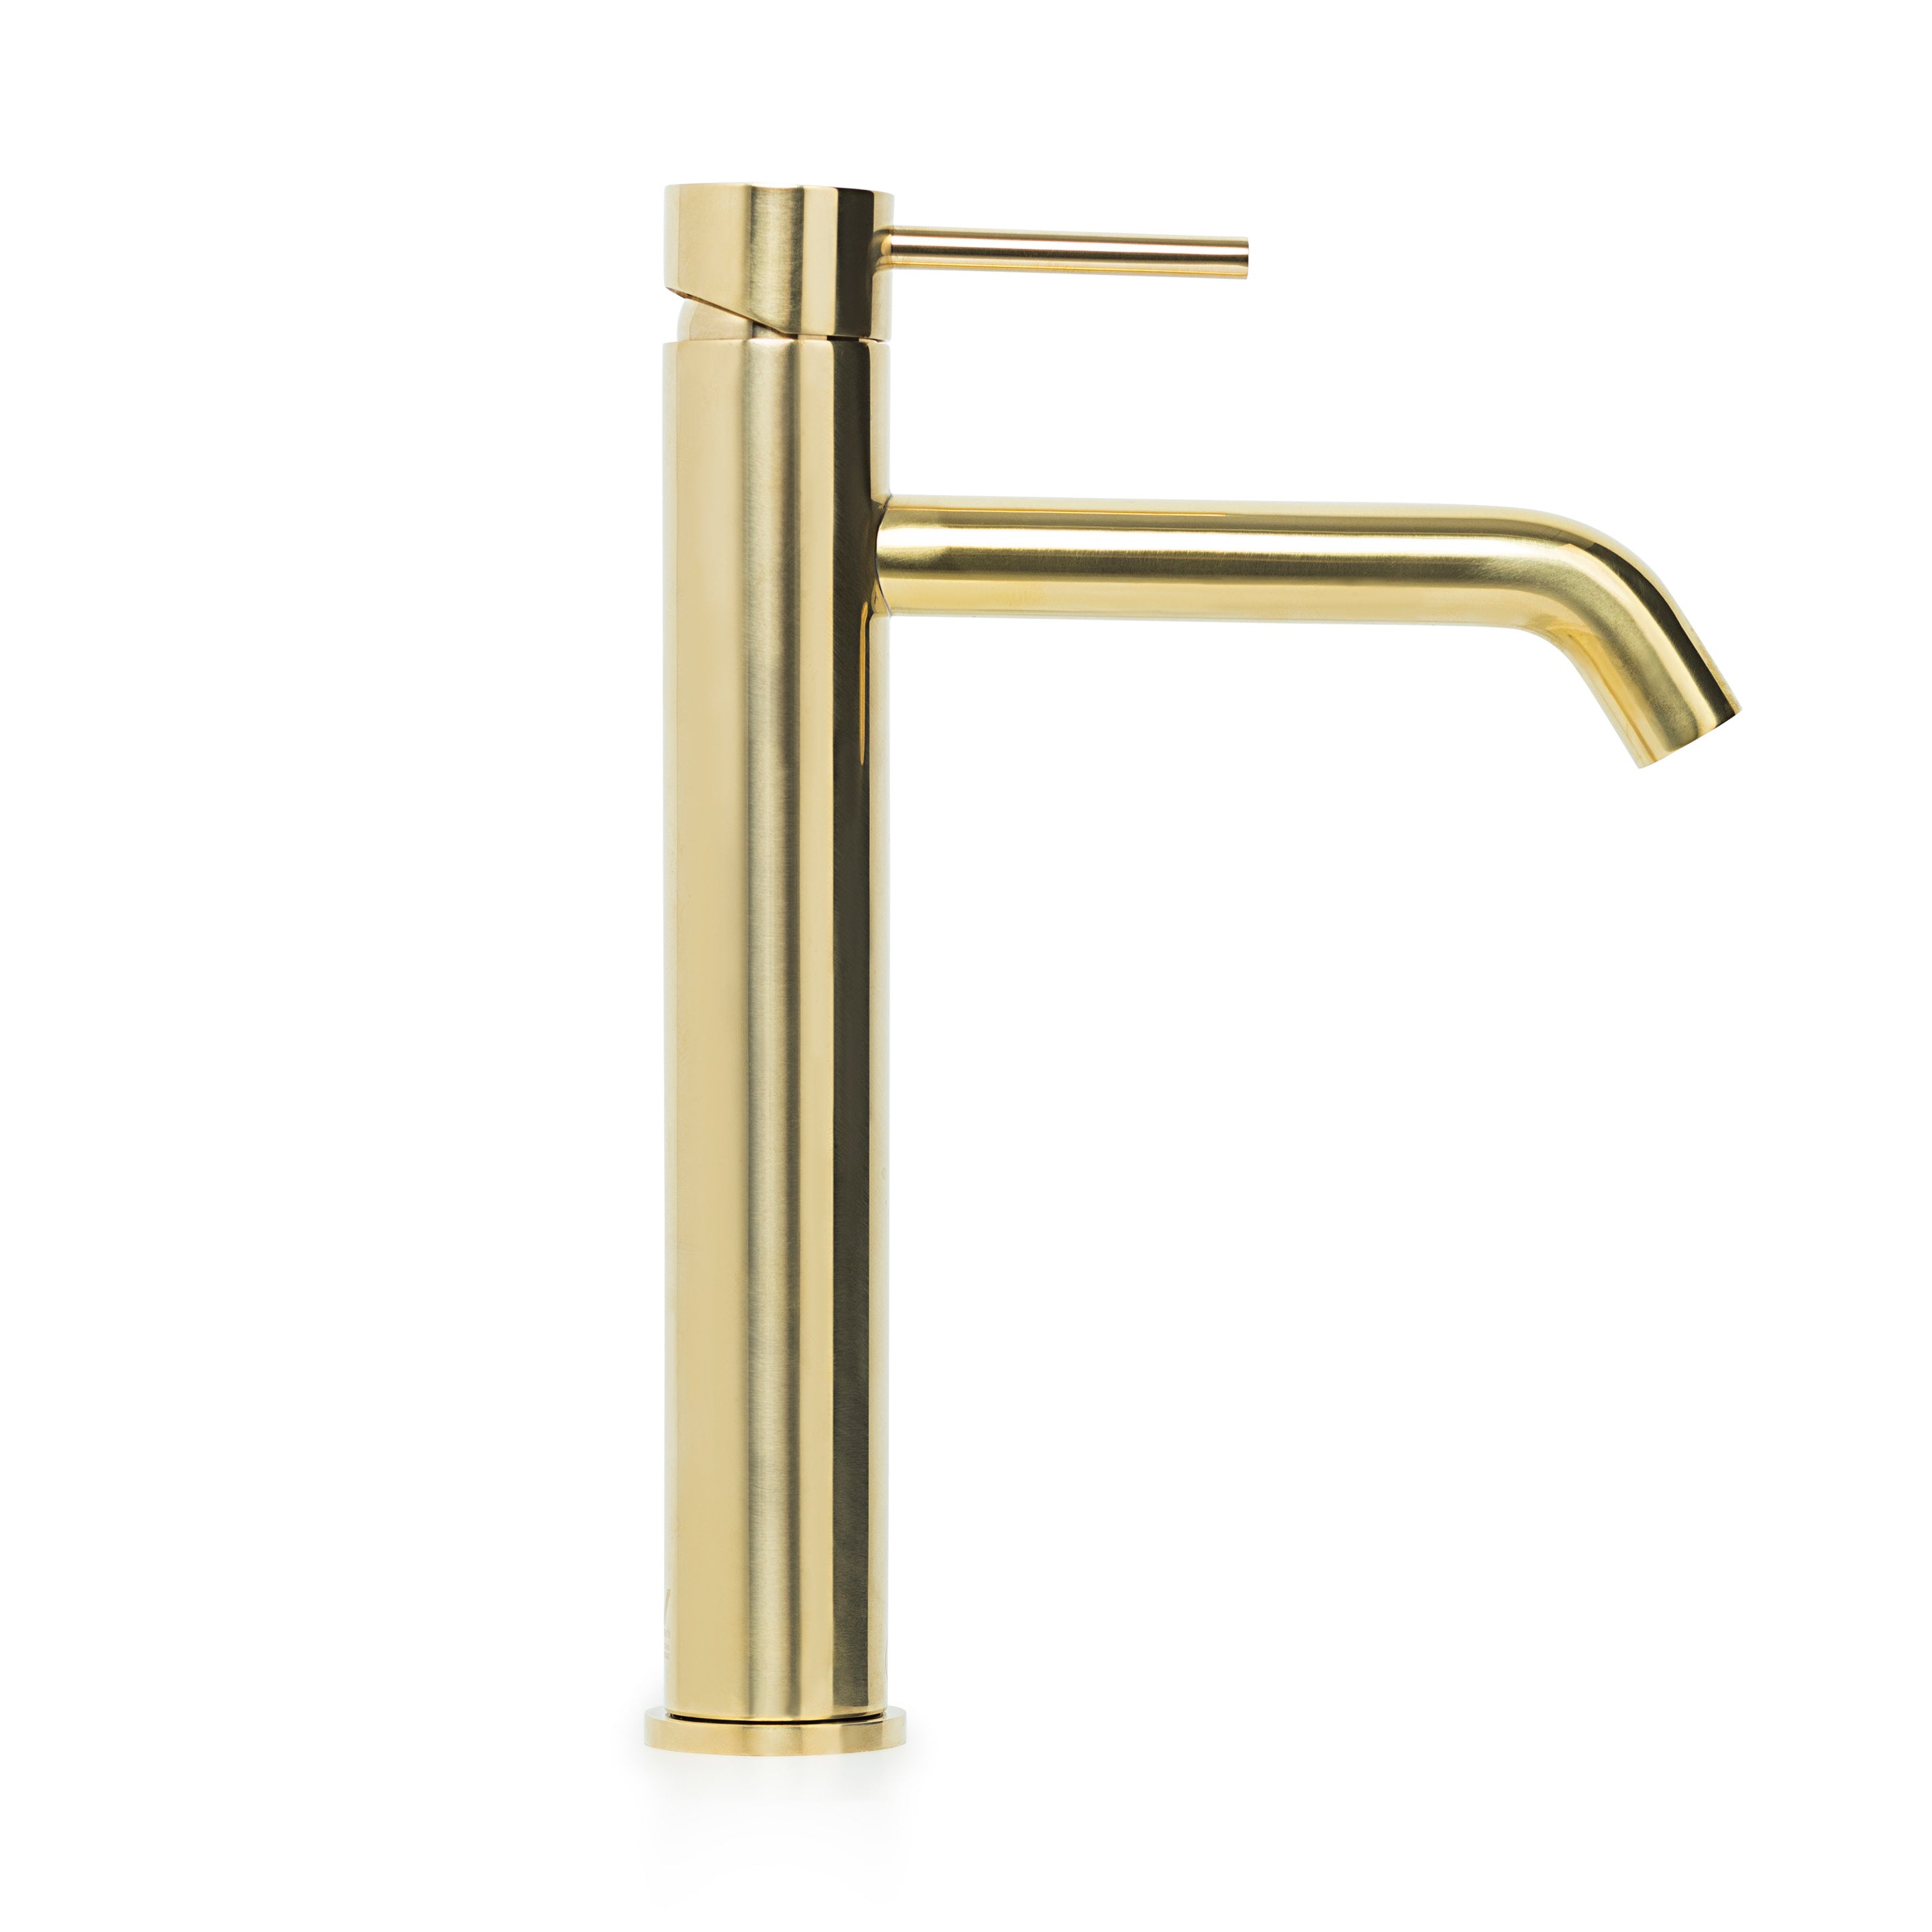 Bondi Pin Lever Extended Basin Mixer with Curved Spout in Raw Brass